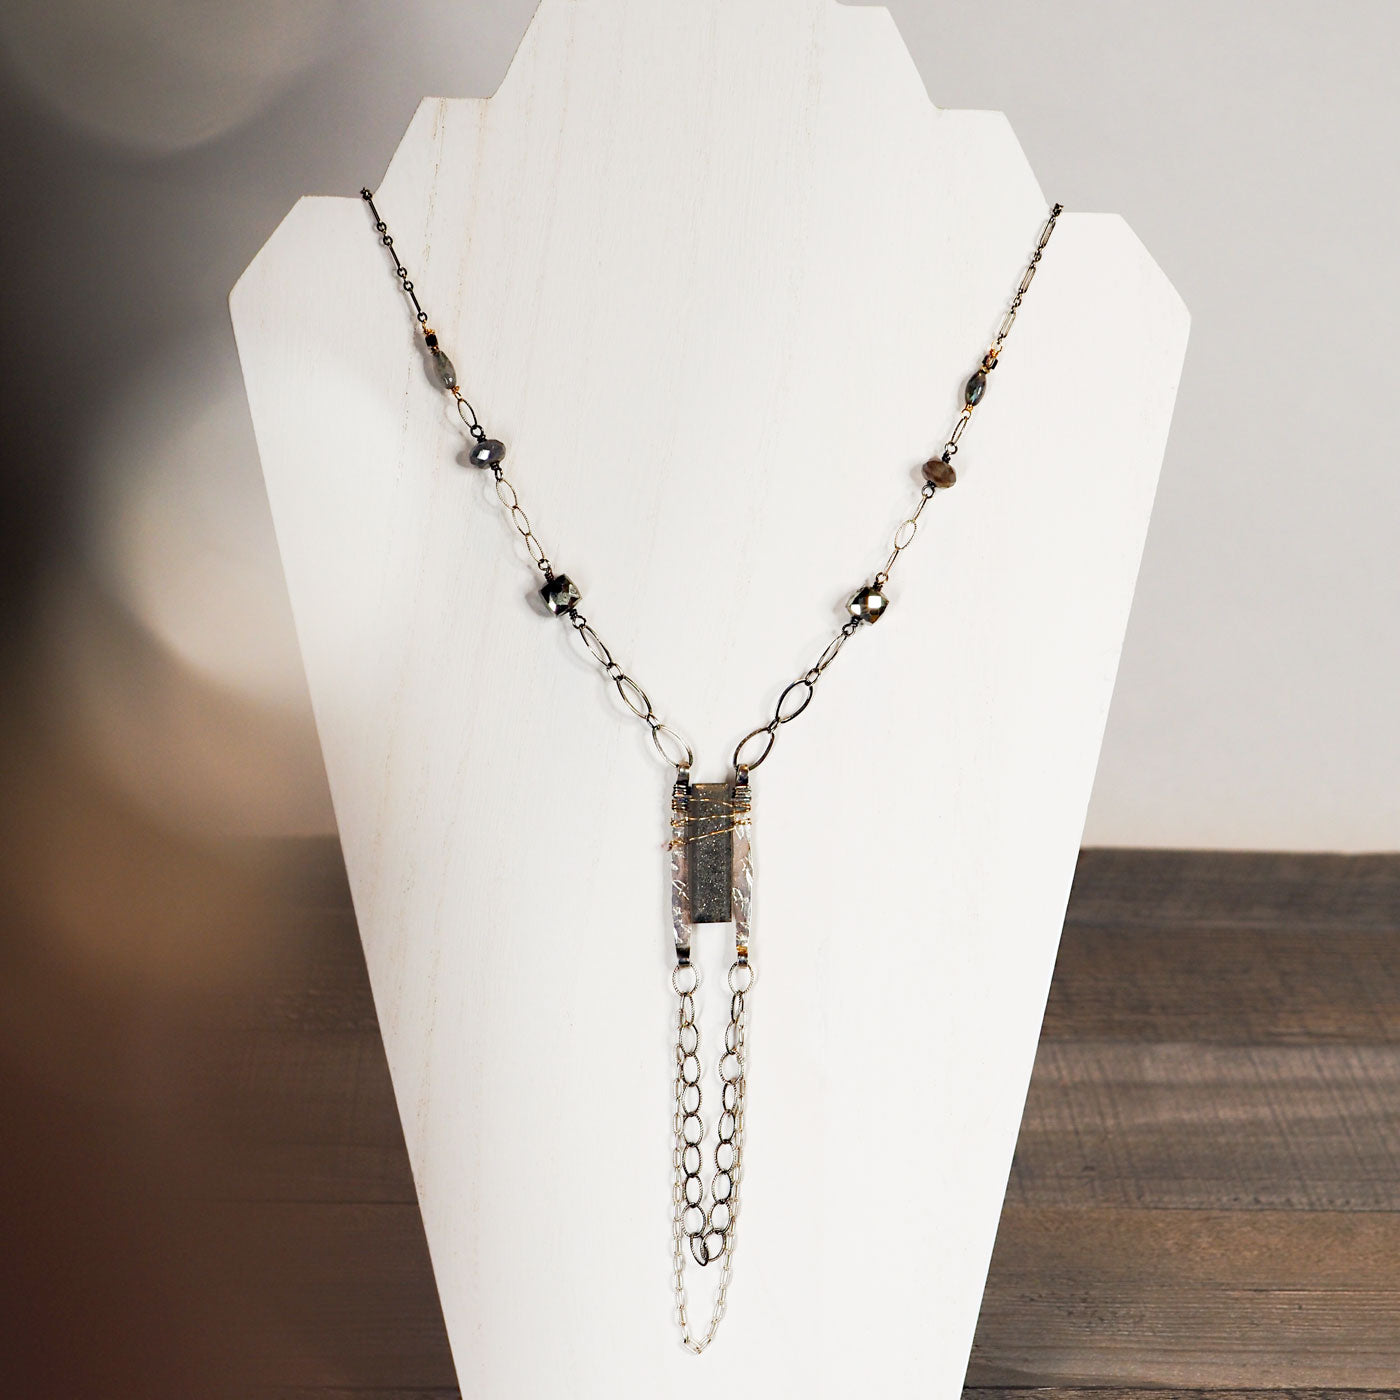 A flock of birds flies around a sparkly black sunstone brick at the center of this statement necklace. Pyrite cushion cut cubes and Labradorite faceted gemstones sprinkle the long wide link sterling silver chain.